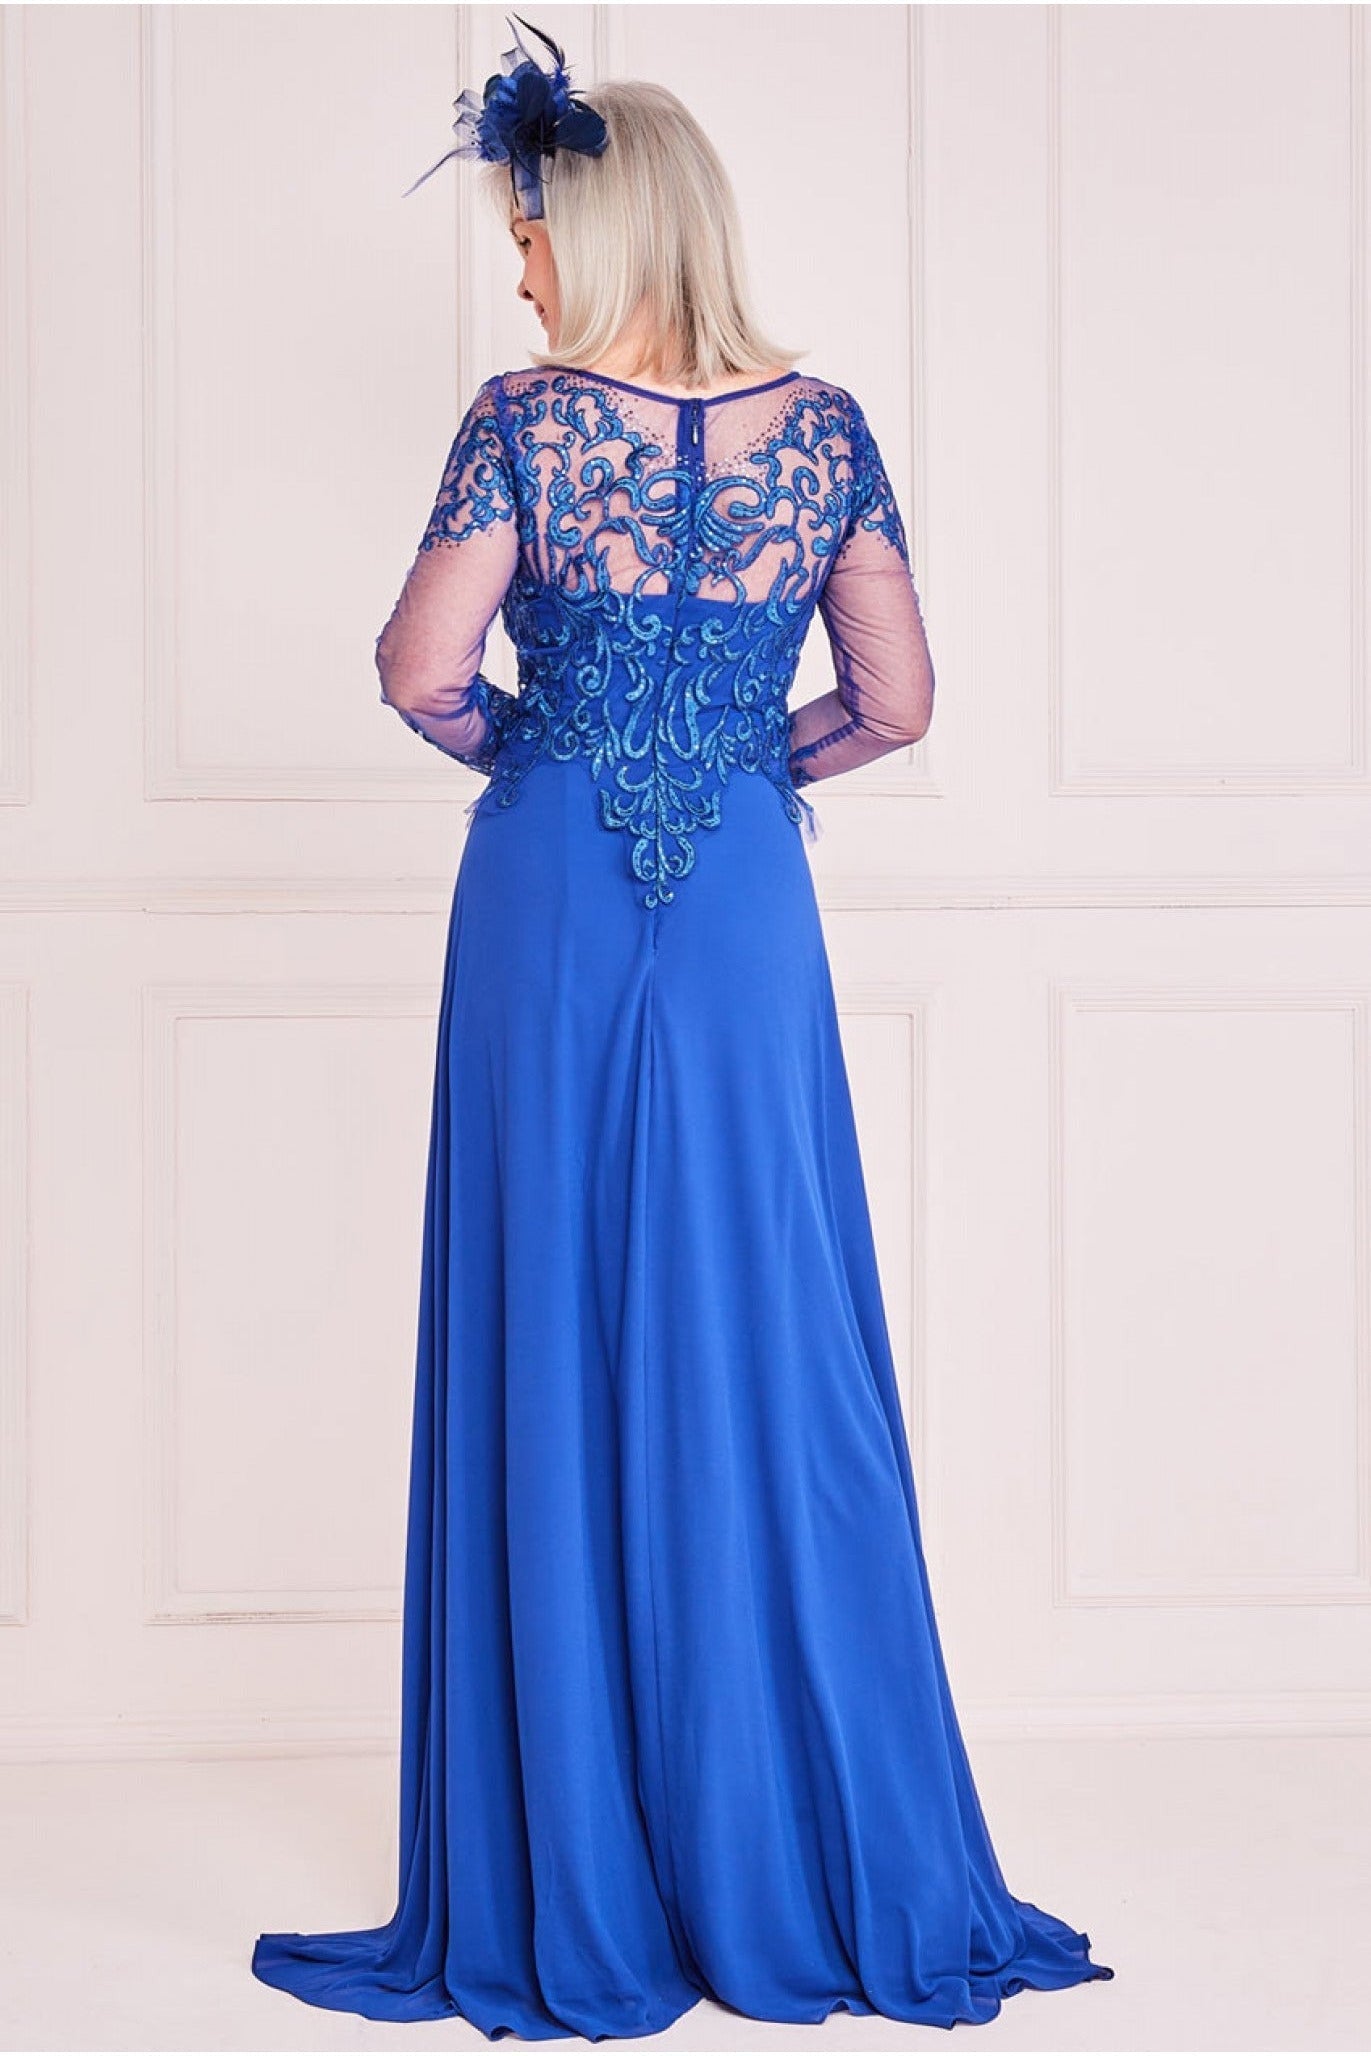 Mesh & Lace Embroidered Bodice Maxi - Royal Blue DR3260M